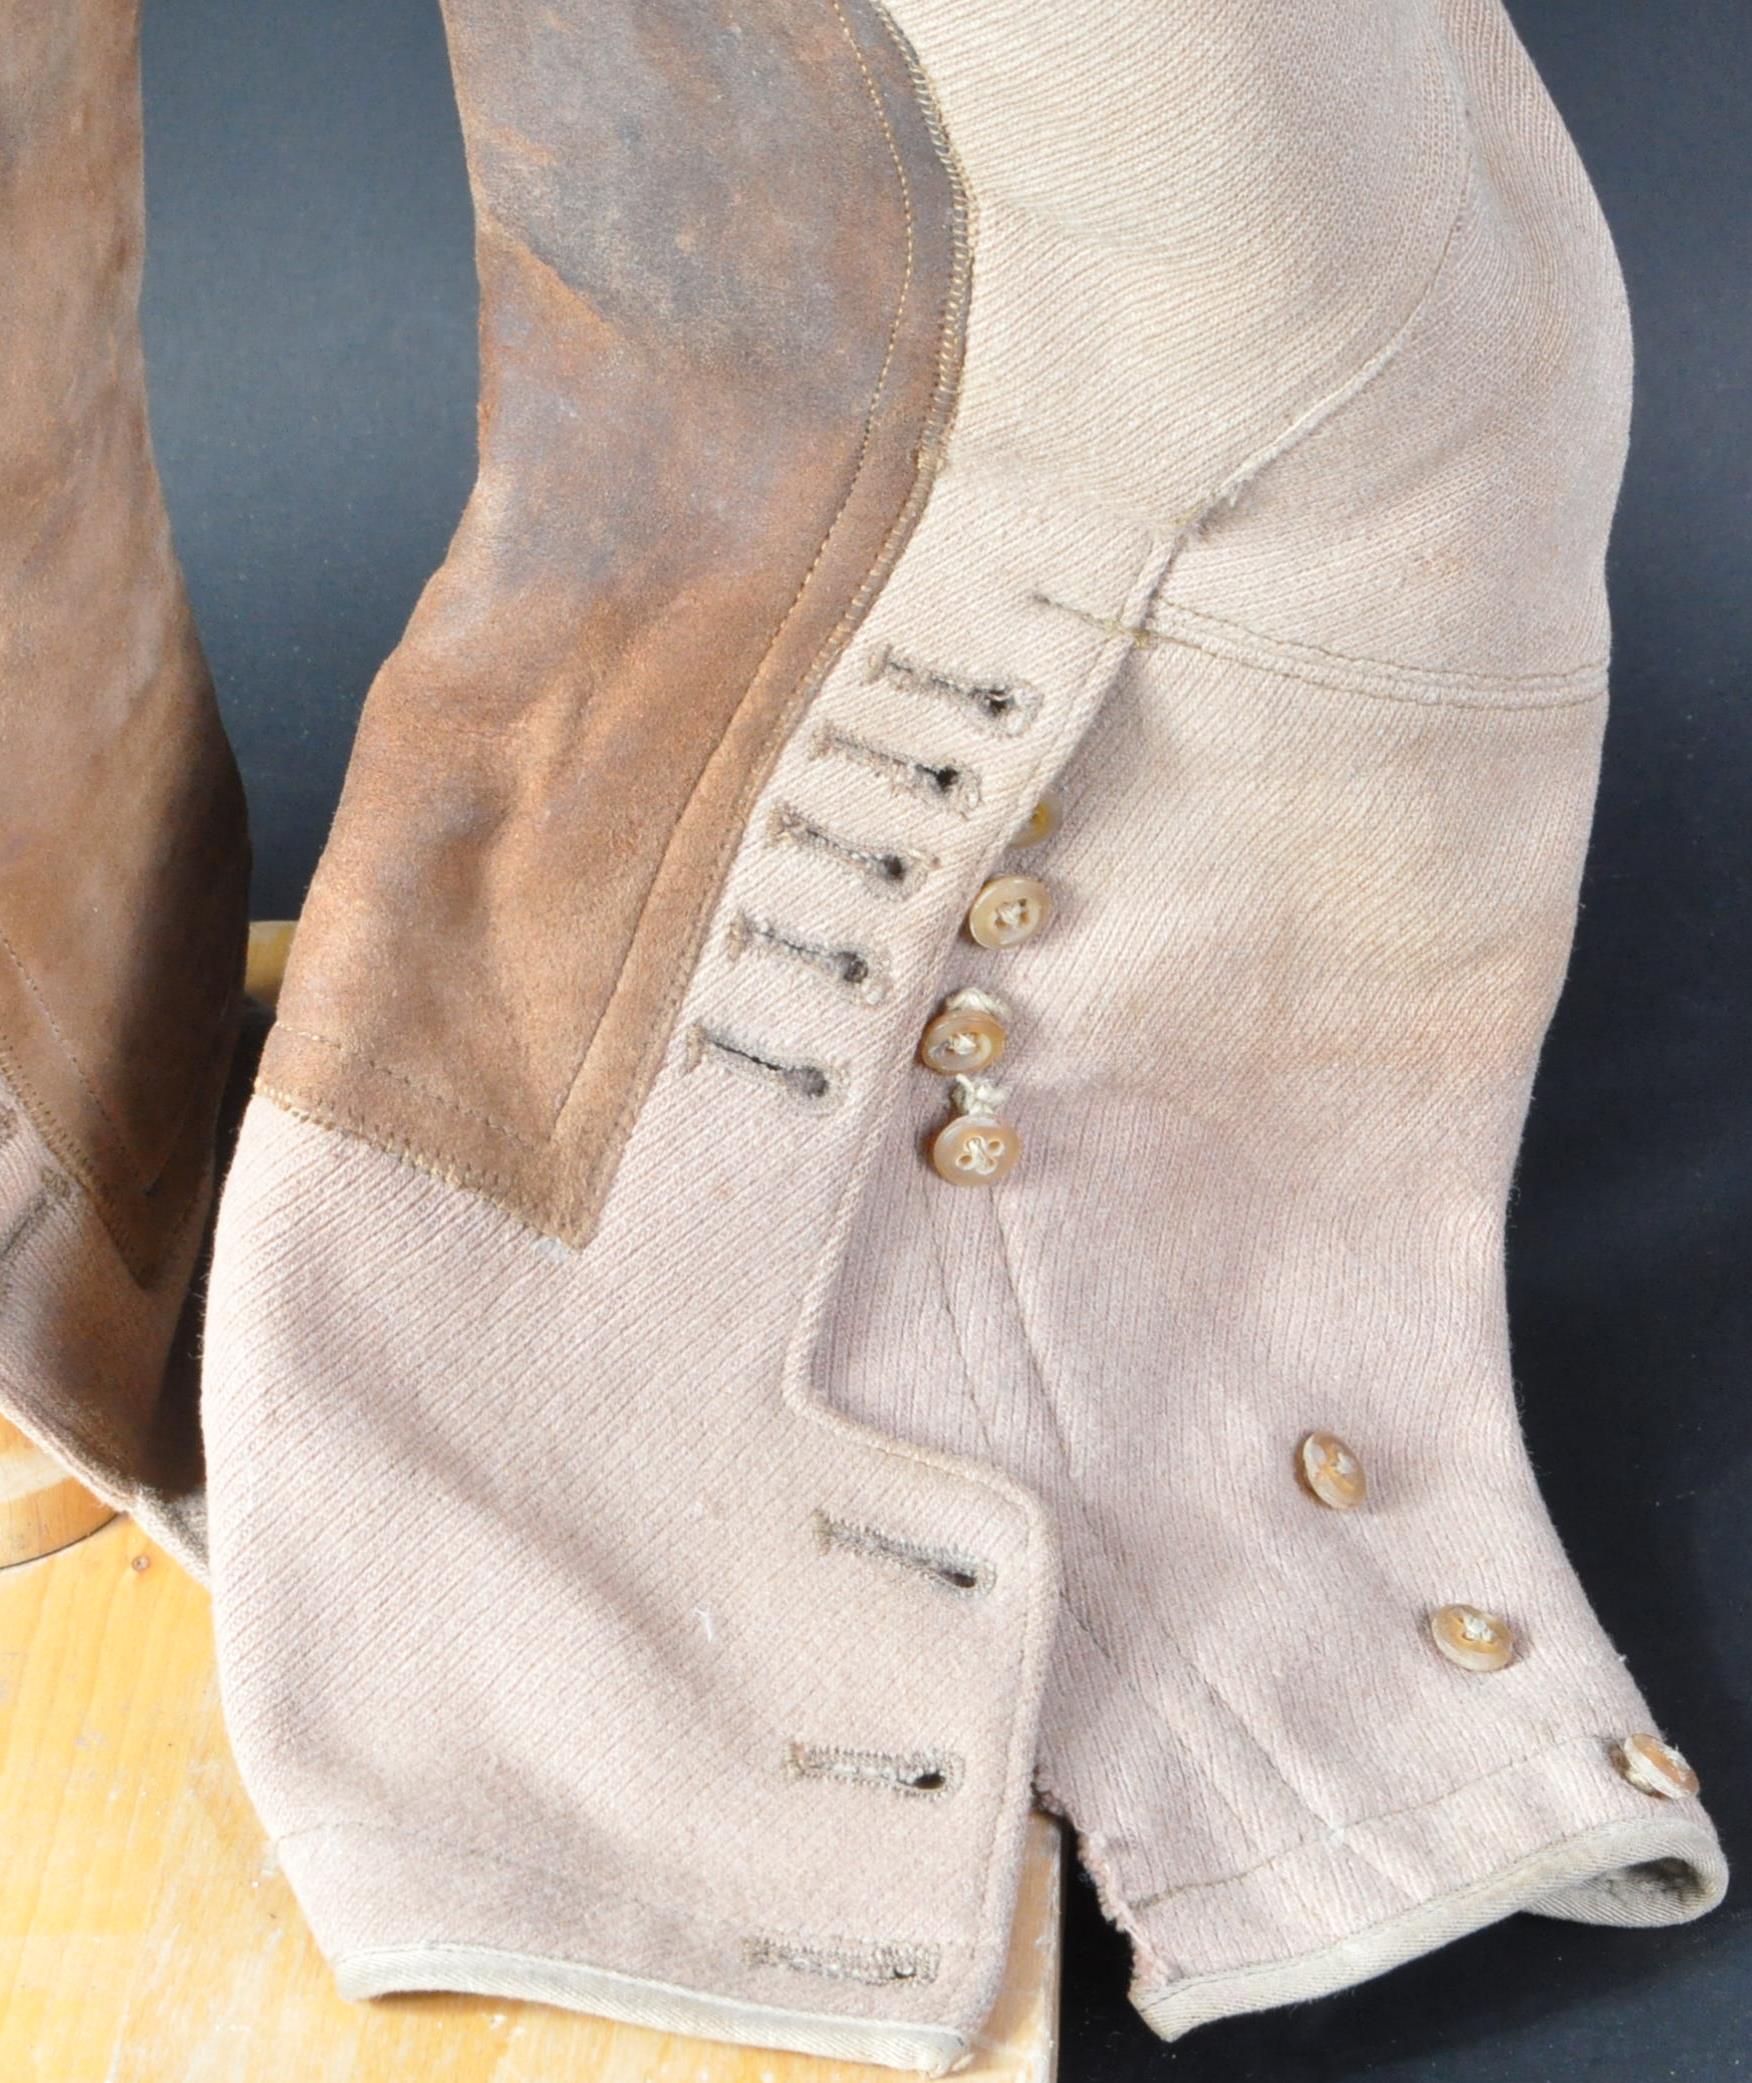 WWII SECOND WORLD WAR MILITARY BREECHES / TROUSERS - Image 6 of 8